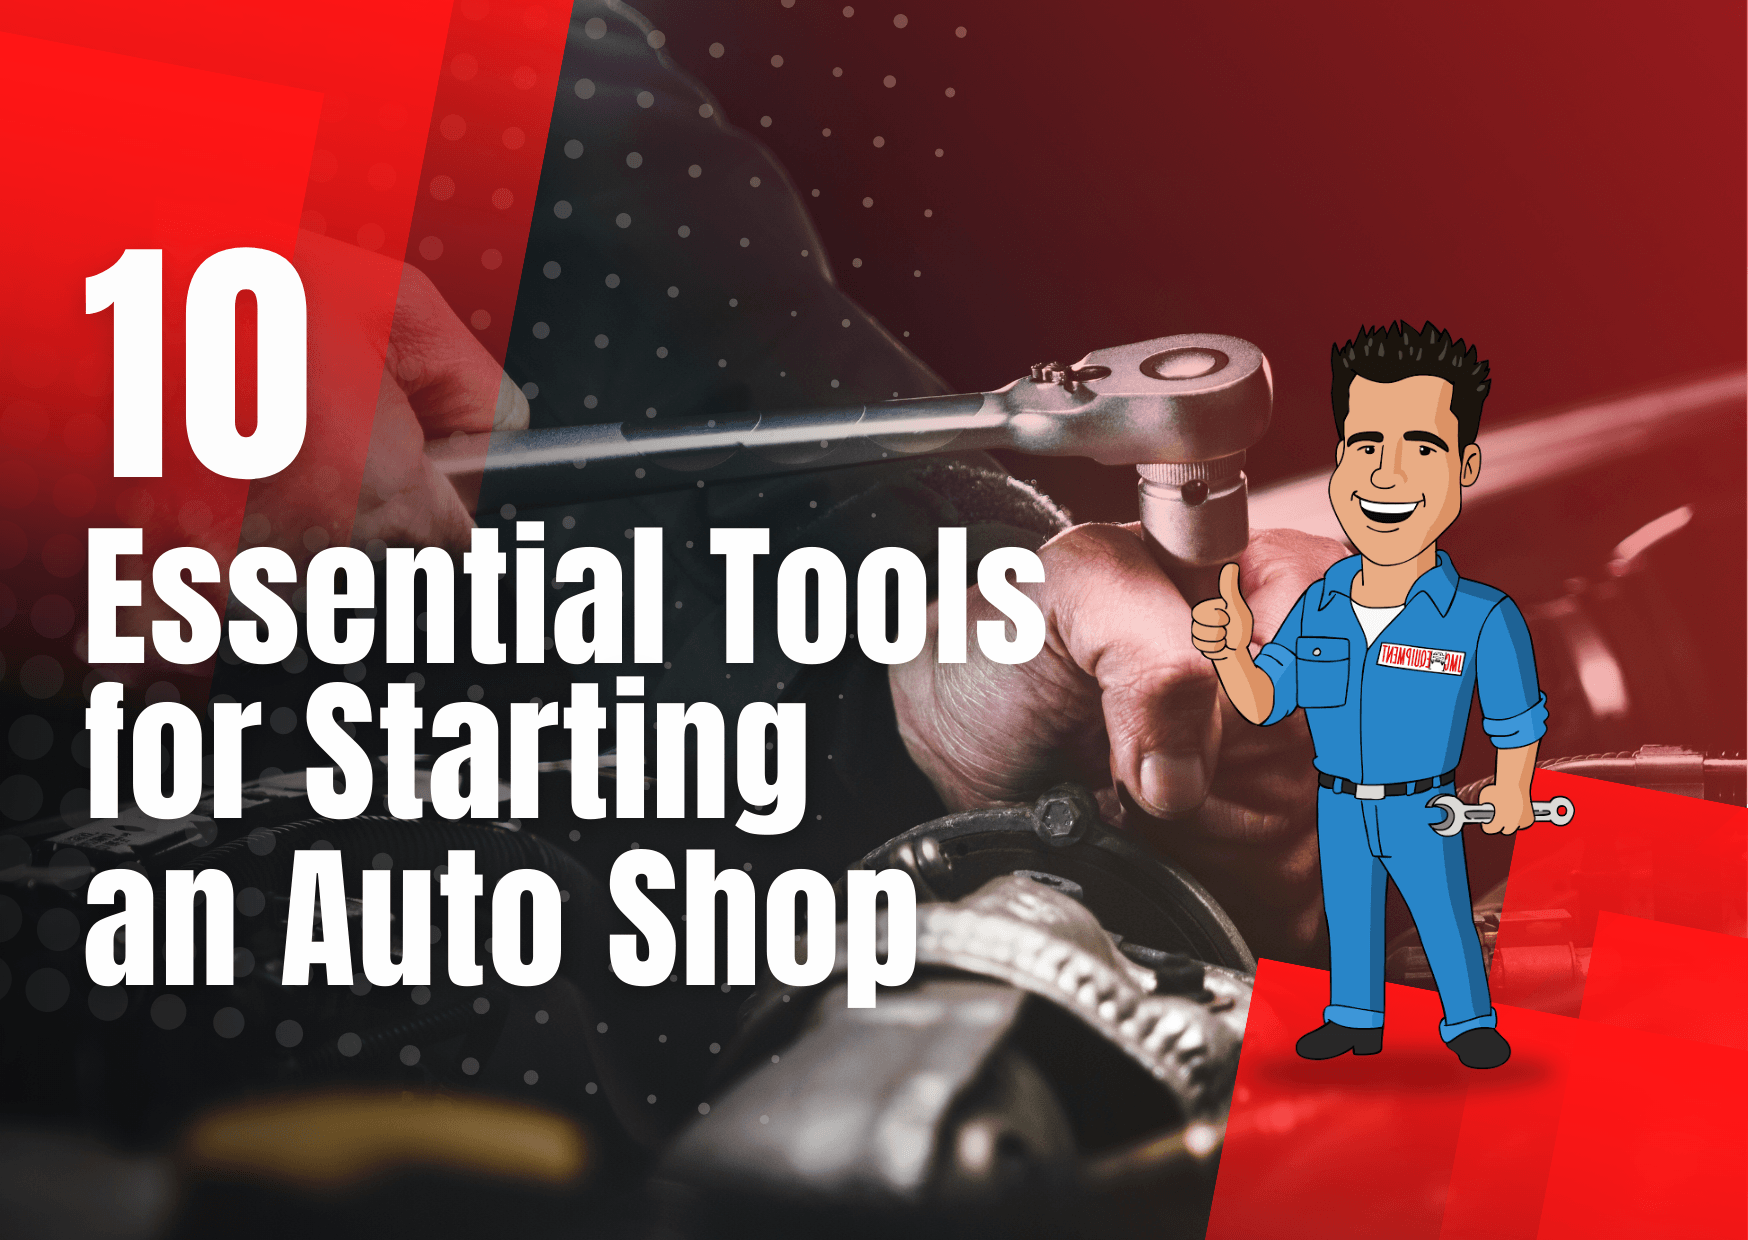 https://cdn11.bigcommerce.com/s-48ae1/product_images/uploaded_images/know-the-essential-tools-and-equipment-for-starting-an-auto-shop.png